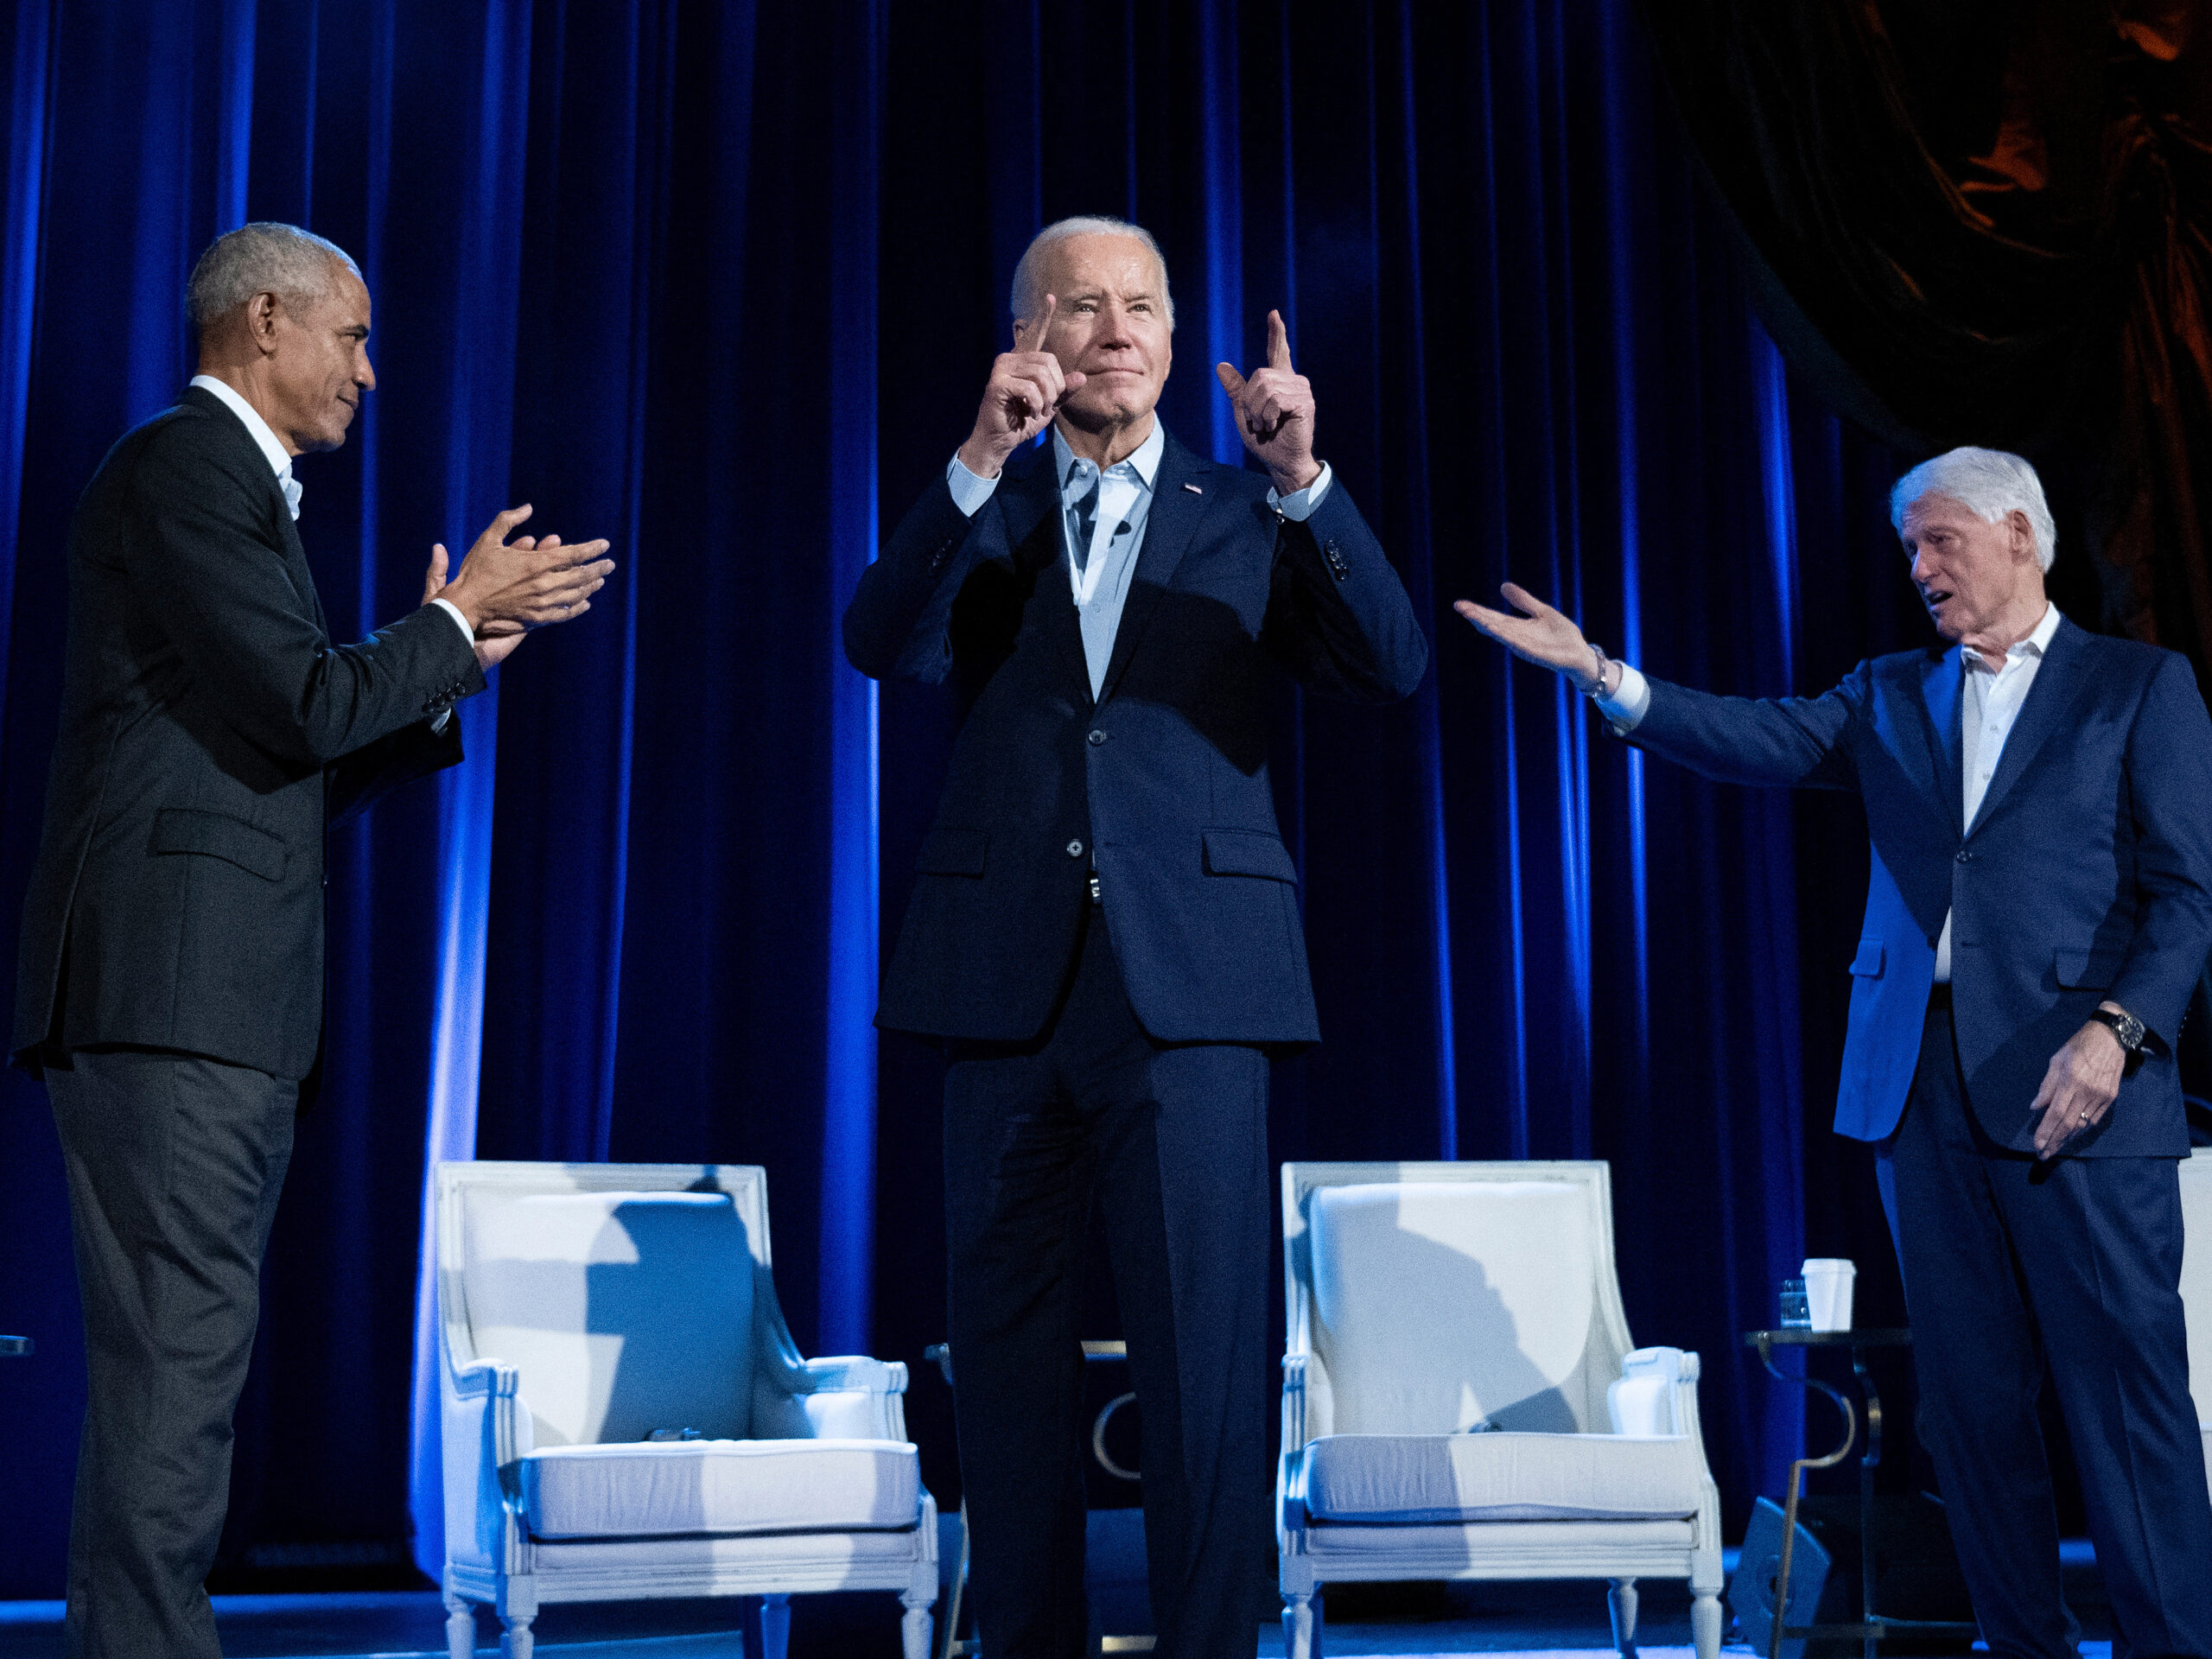 Former President Barack Obama (left) and former President Bill Clinton (right) cheer for President Biden during a campaign fundraising event at Radio City Music Hall in New York City on March 28.